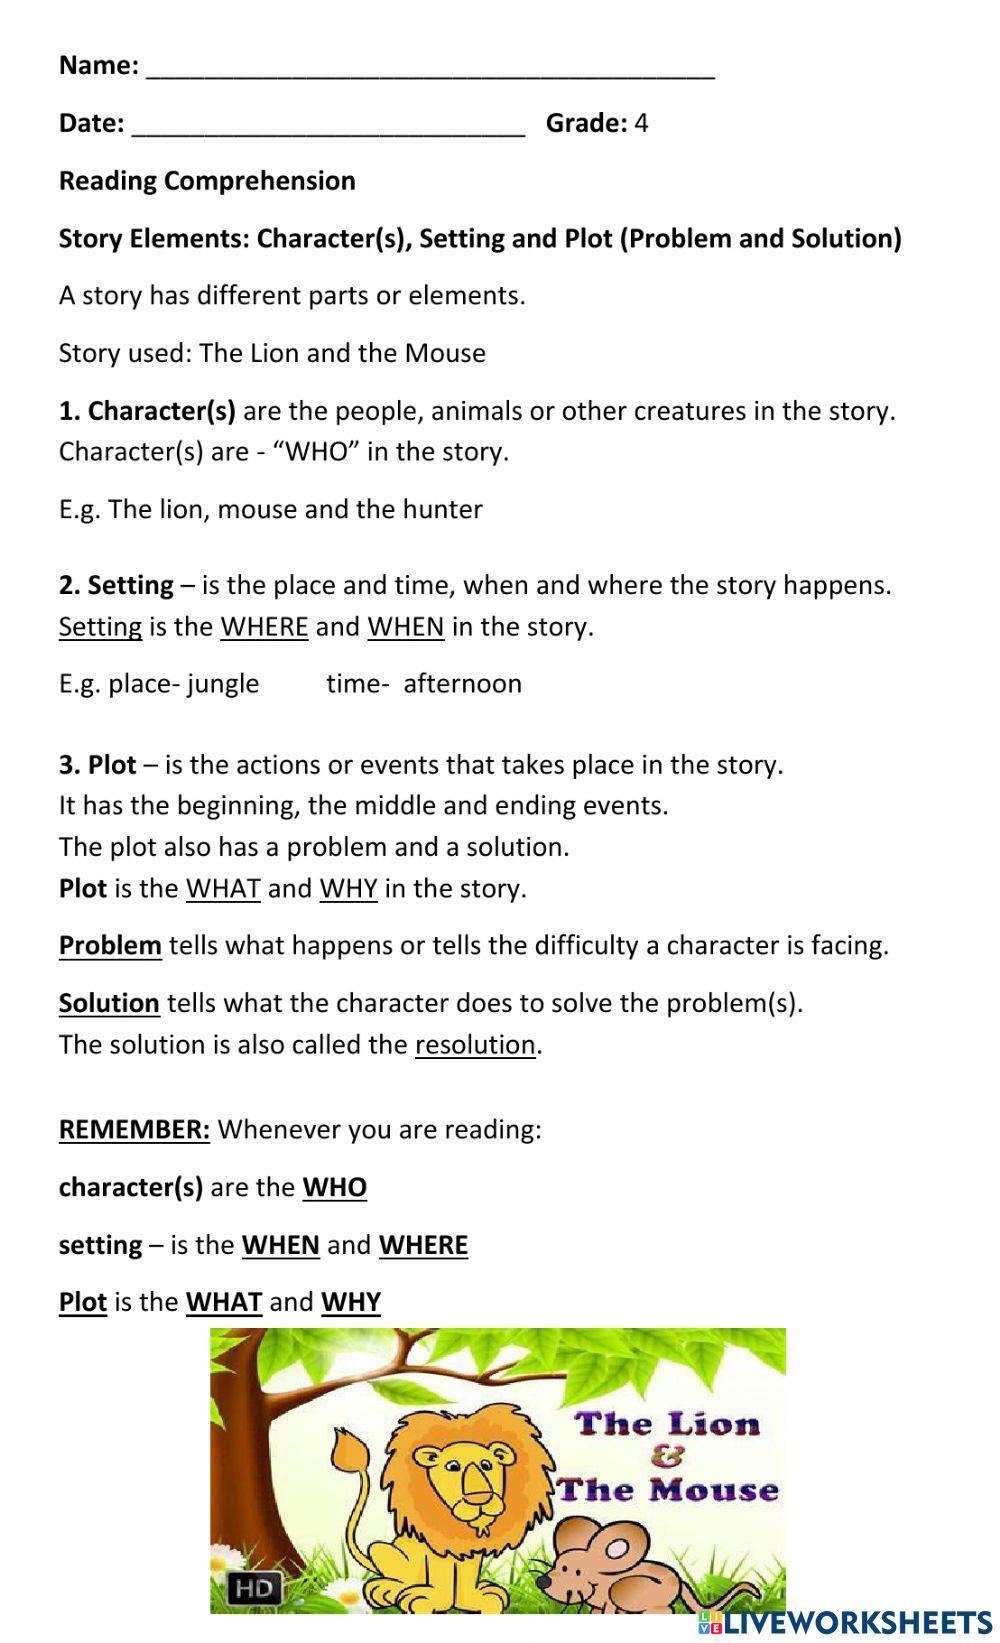 Story Elements - Character, Setting, Plot (Problem and Solution) worksheet  | Live Worksheets